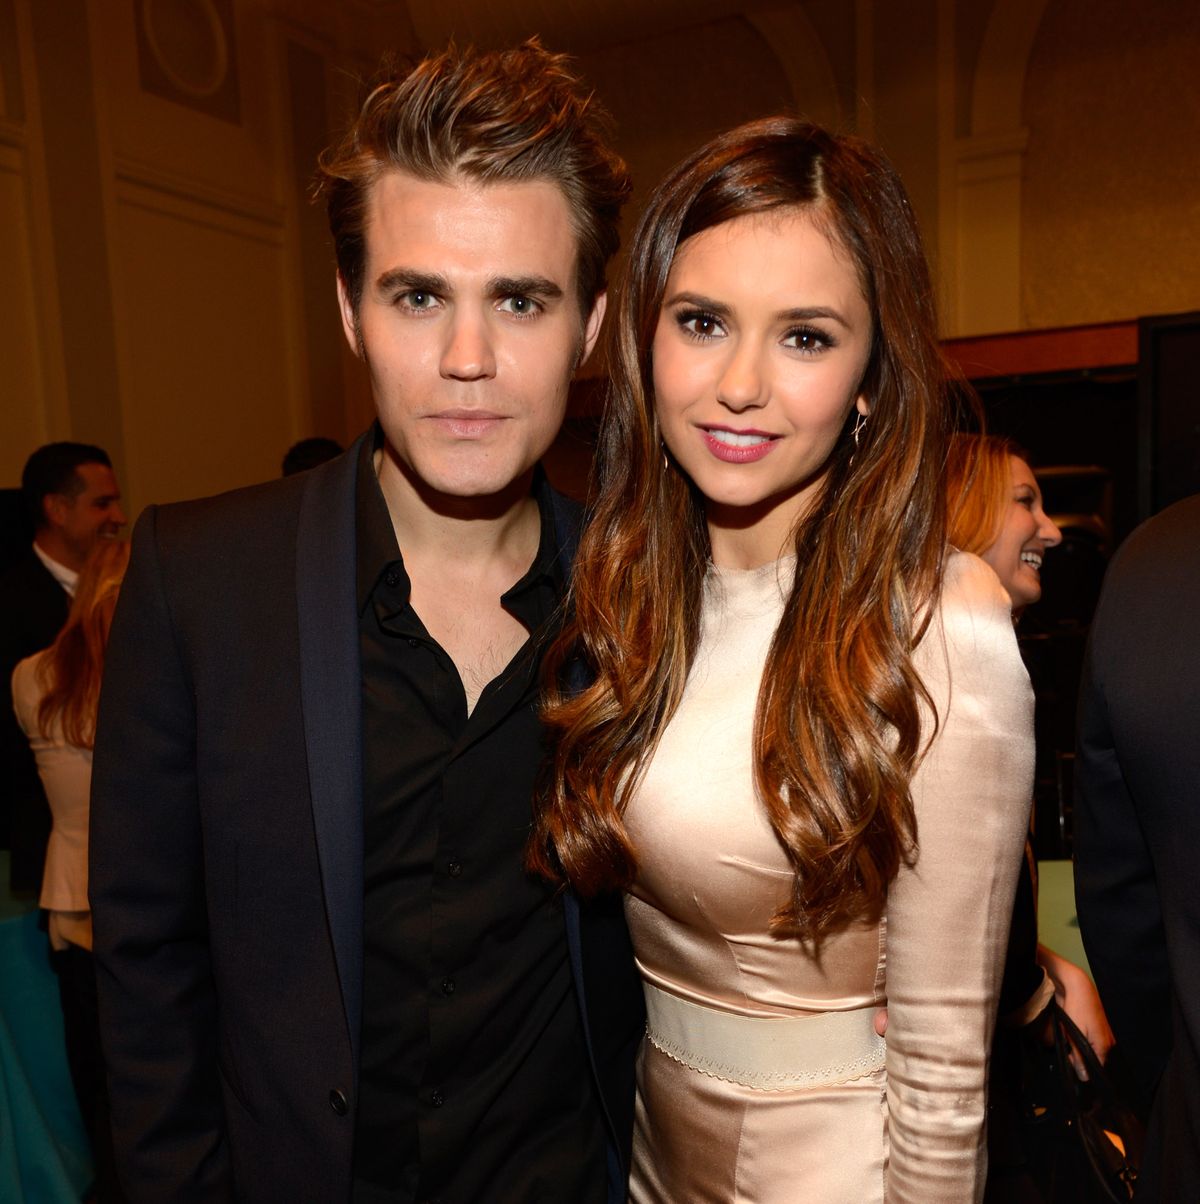 Vampire Diaries' Stars Nina Dobrev And Paul Wesley Hated Each Other